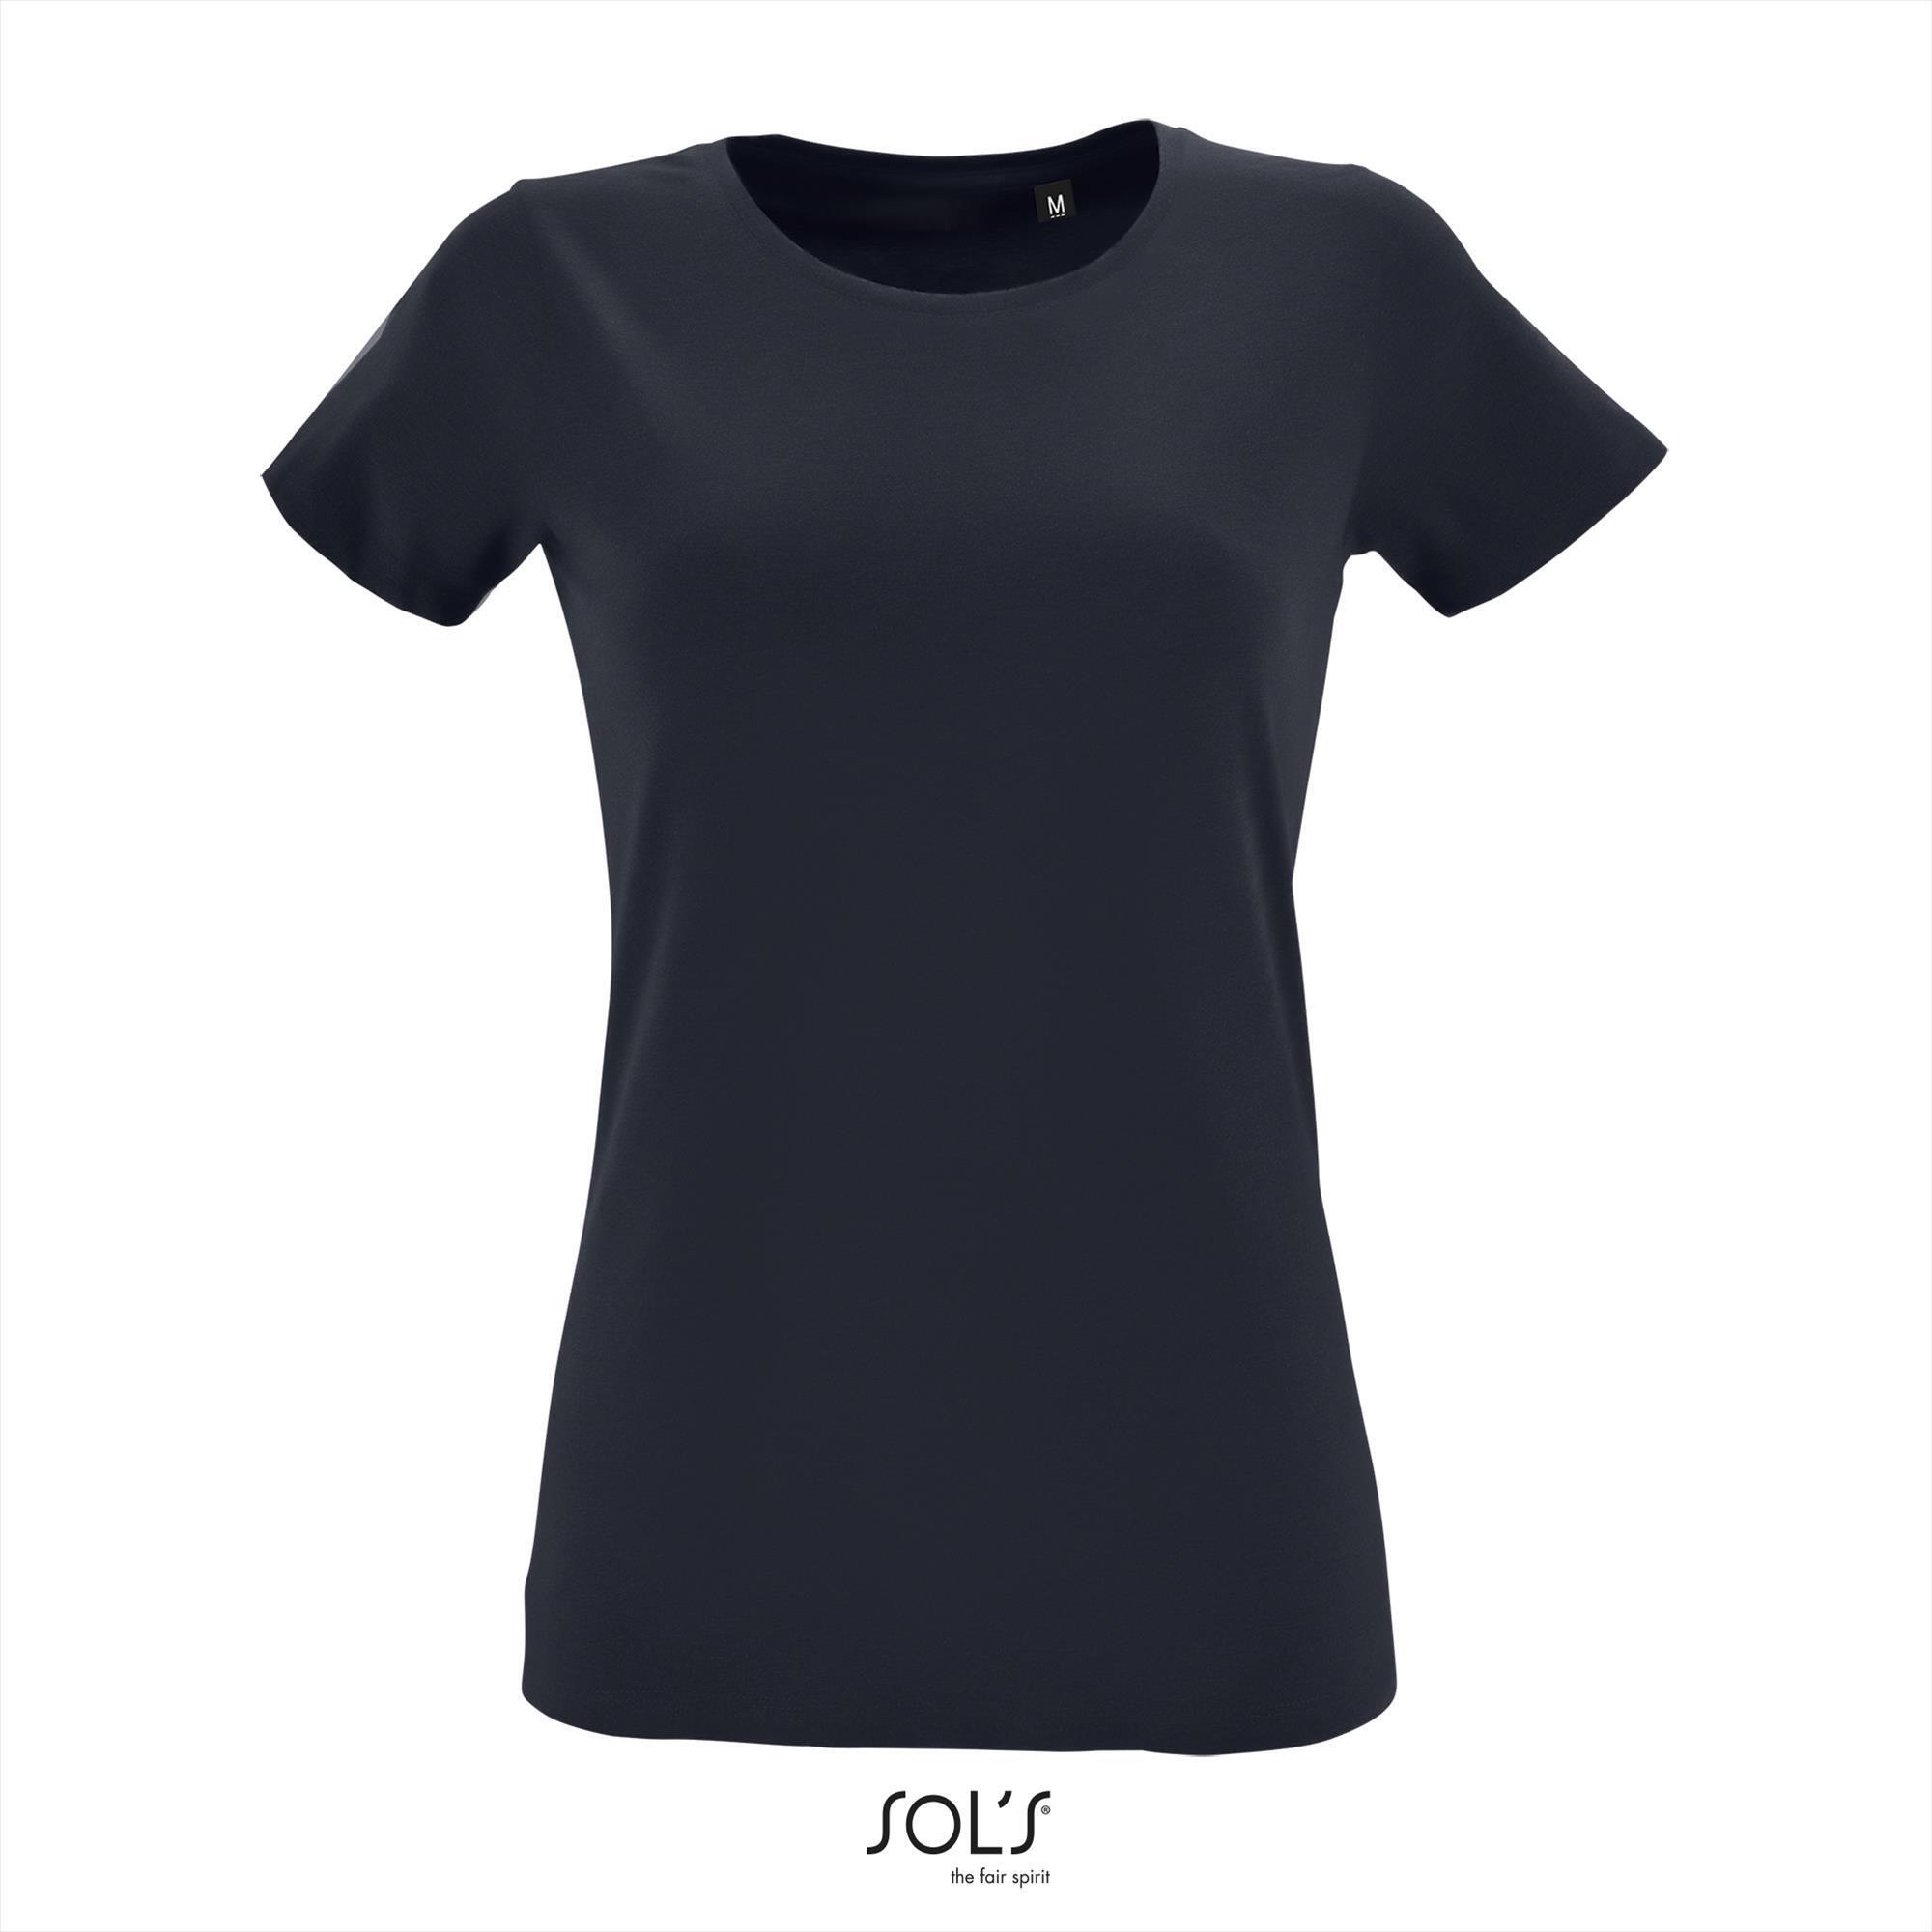 T-shirt Dames donkerblauw fitted met ronde hals